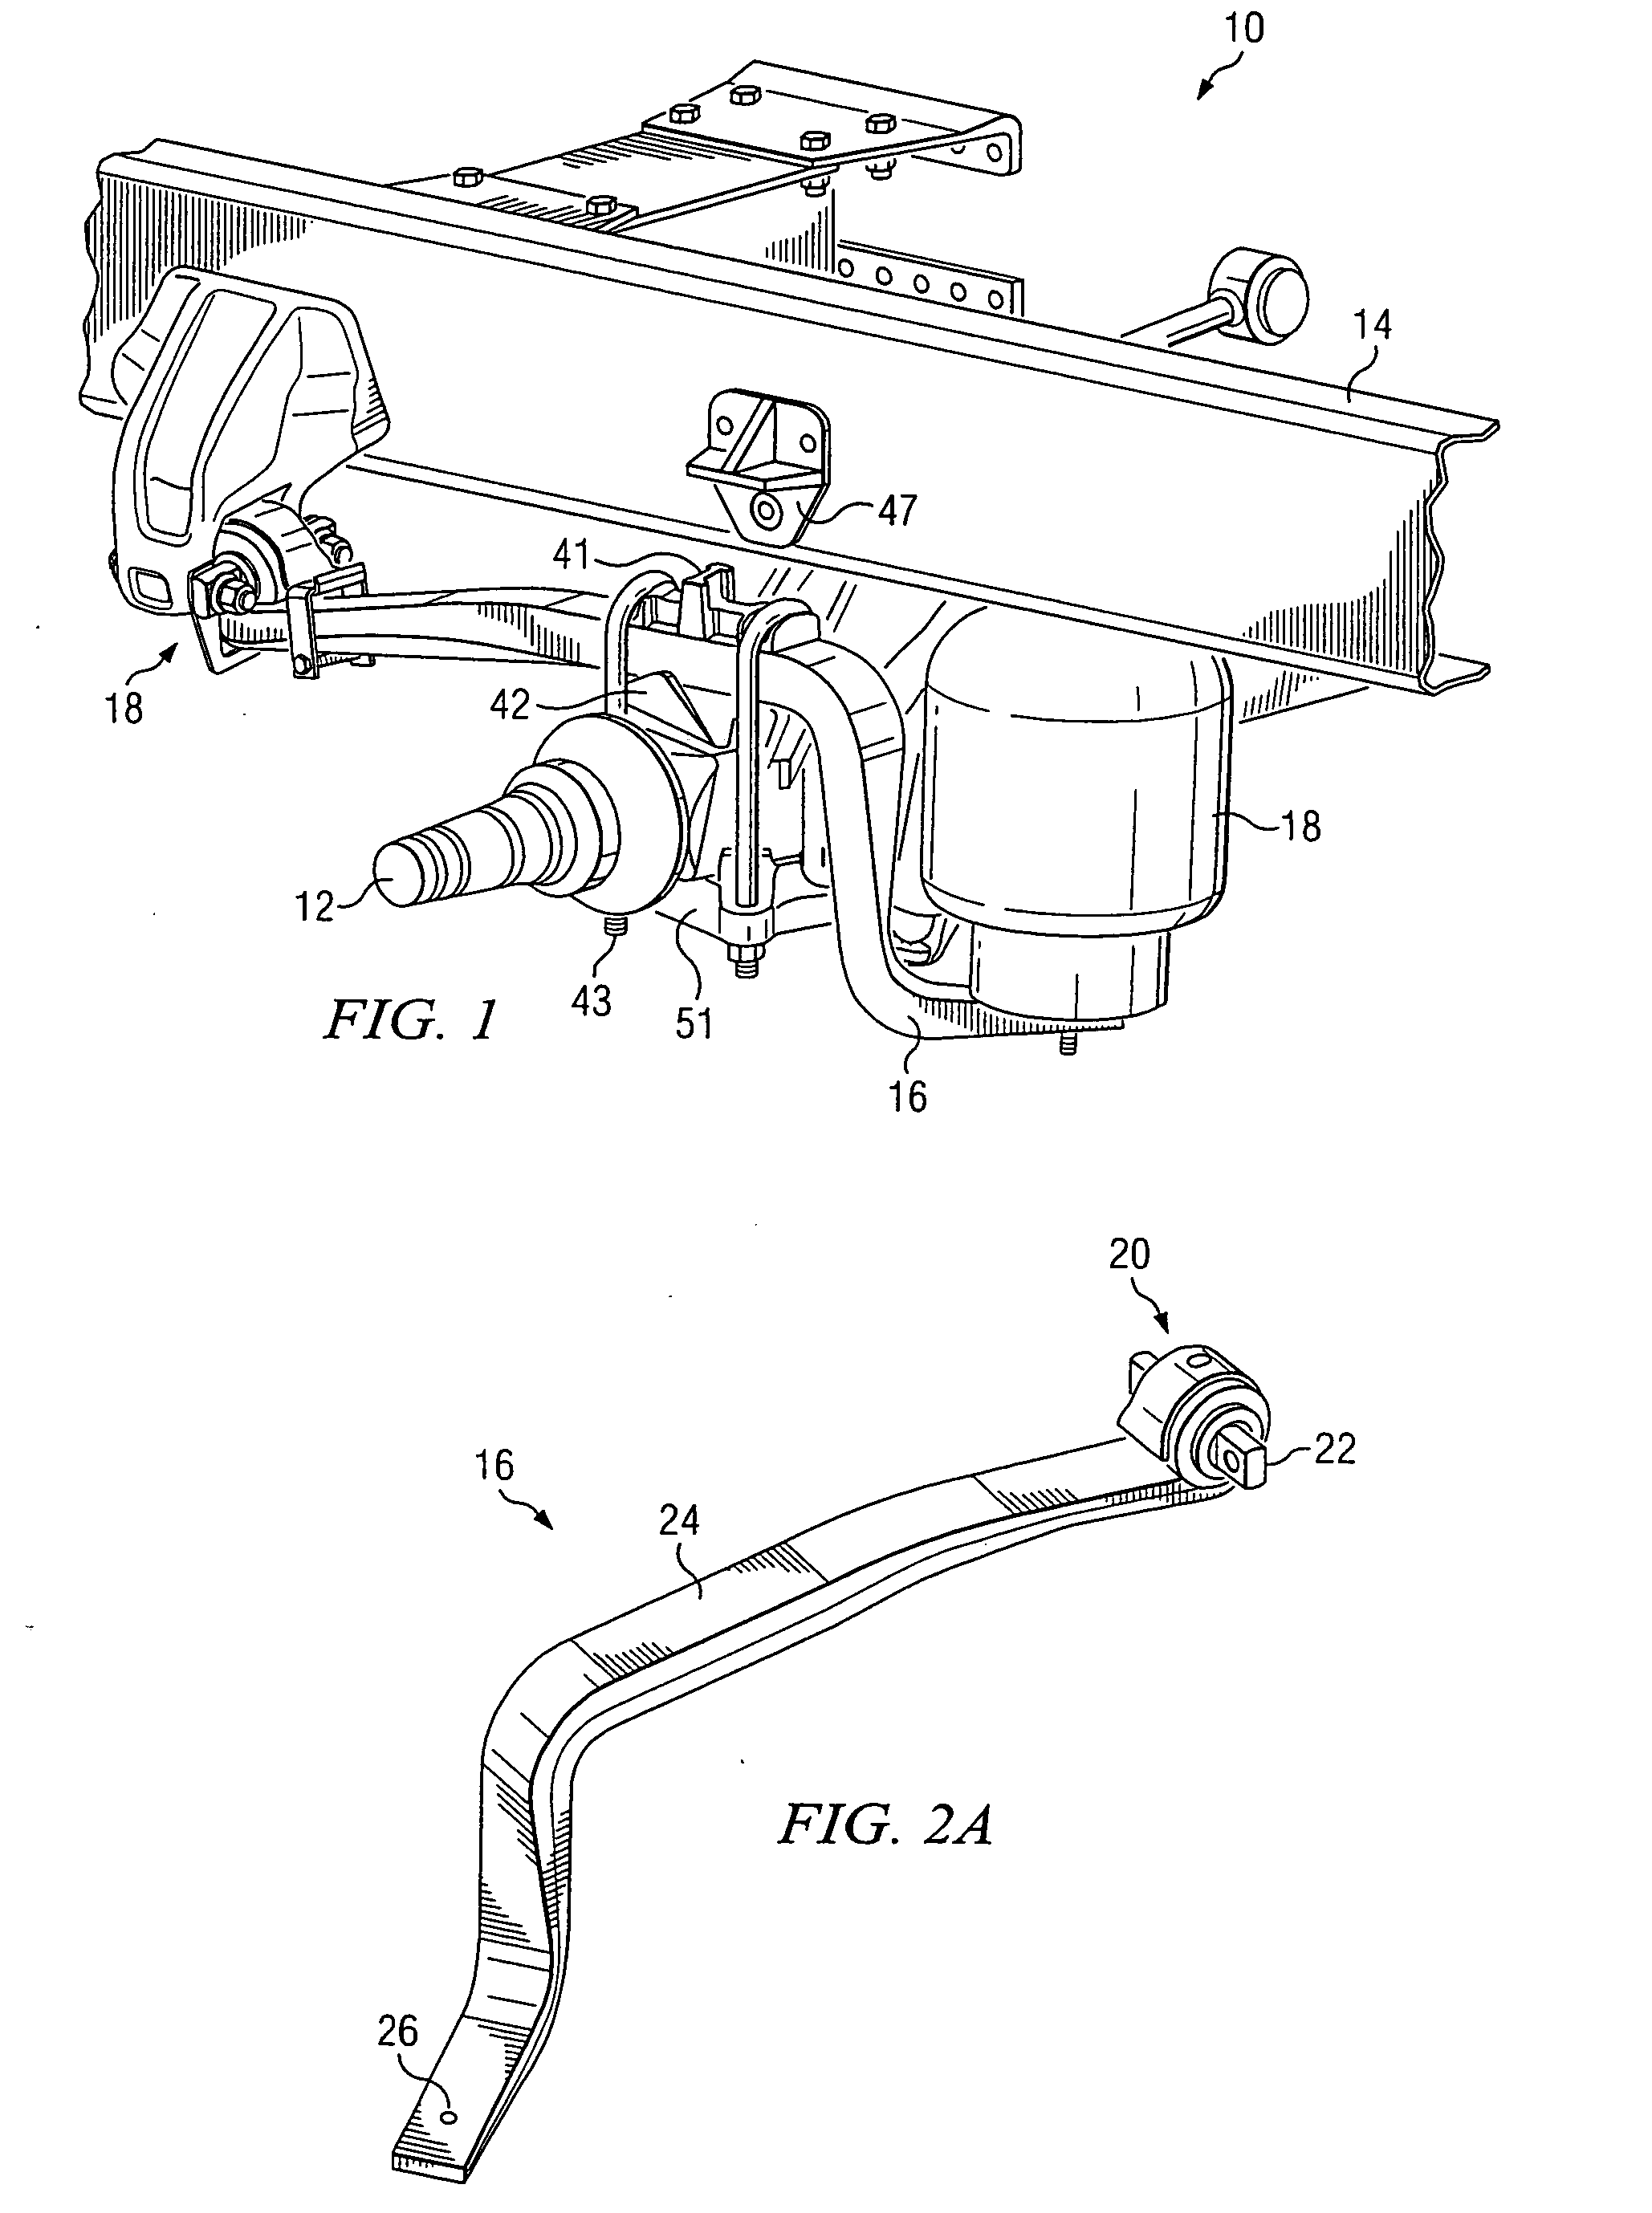 Lightweight, low part-count, suspension system for wheeled vehicles